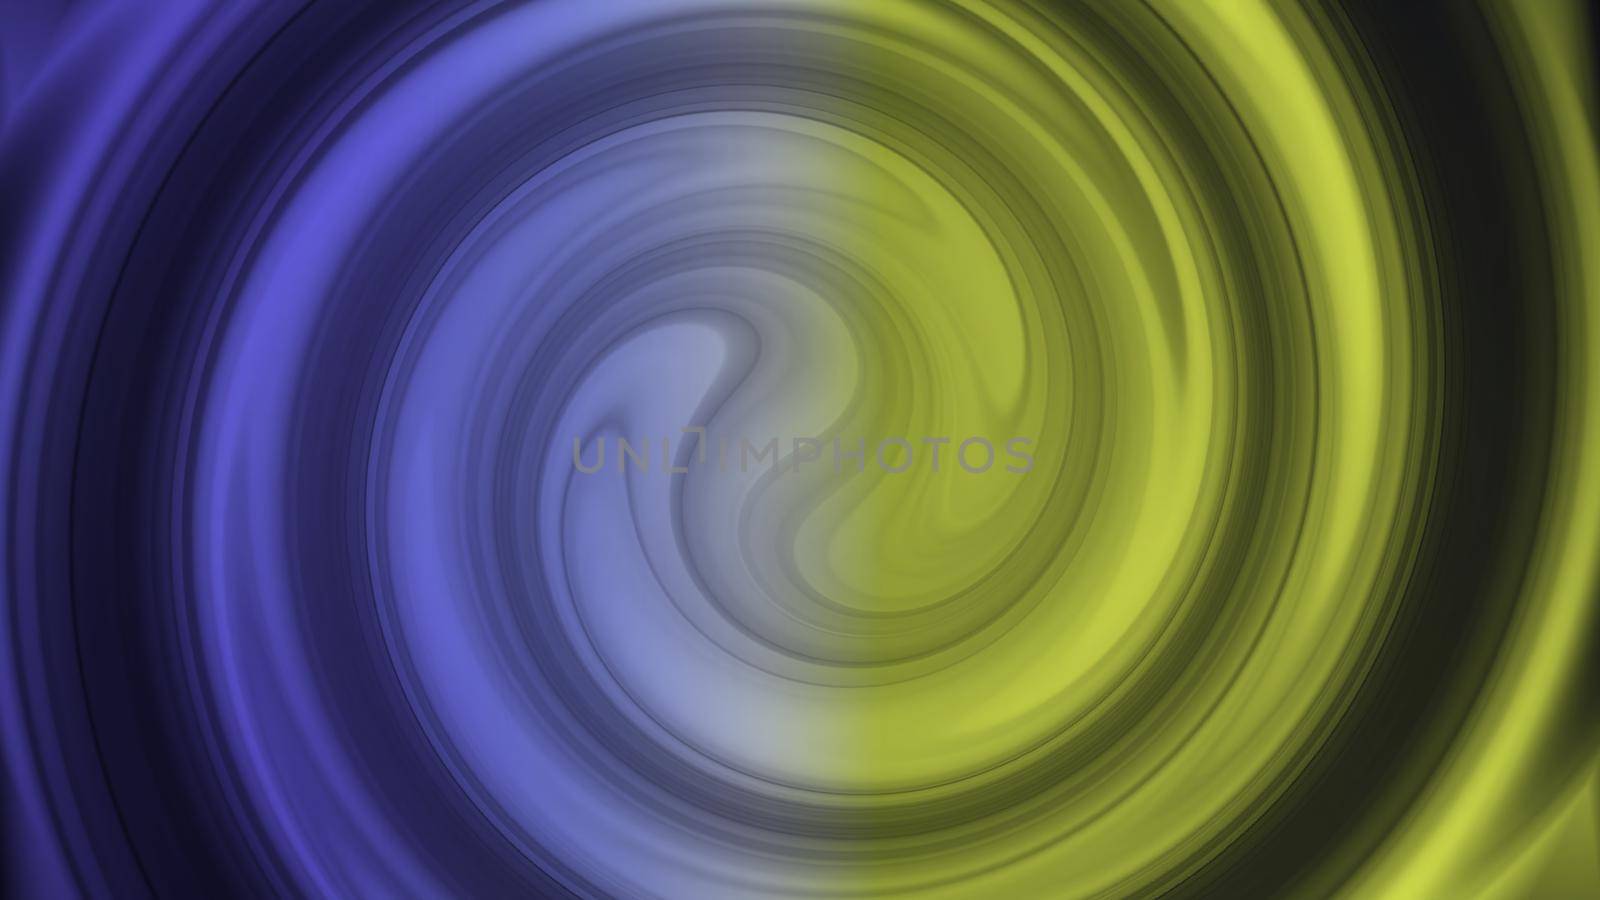 Blue and yellow abstract animation background by cloudyew